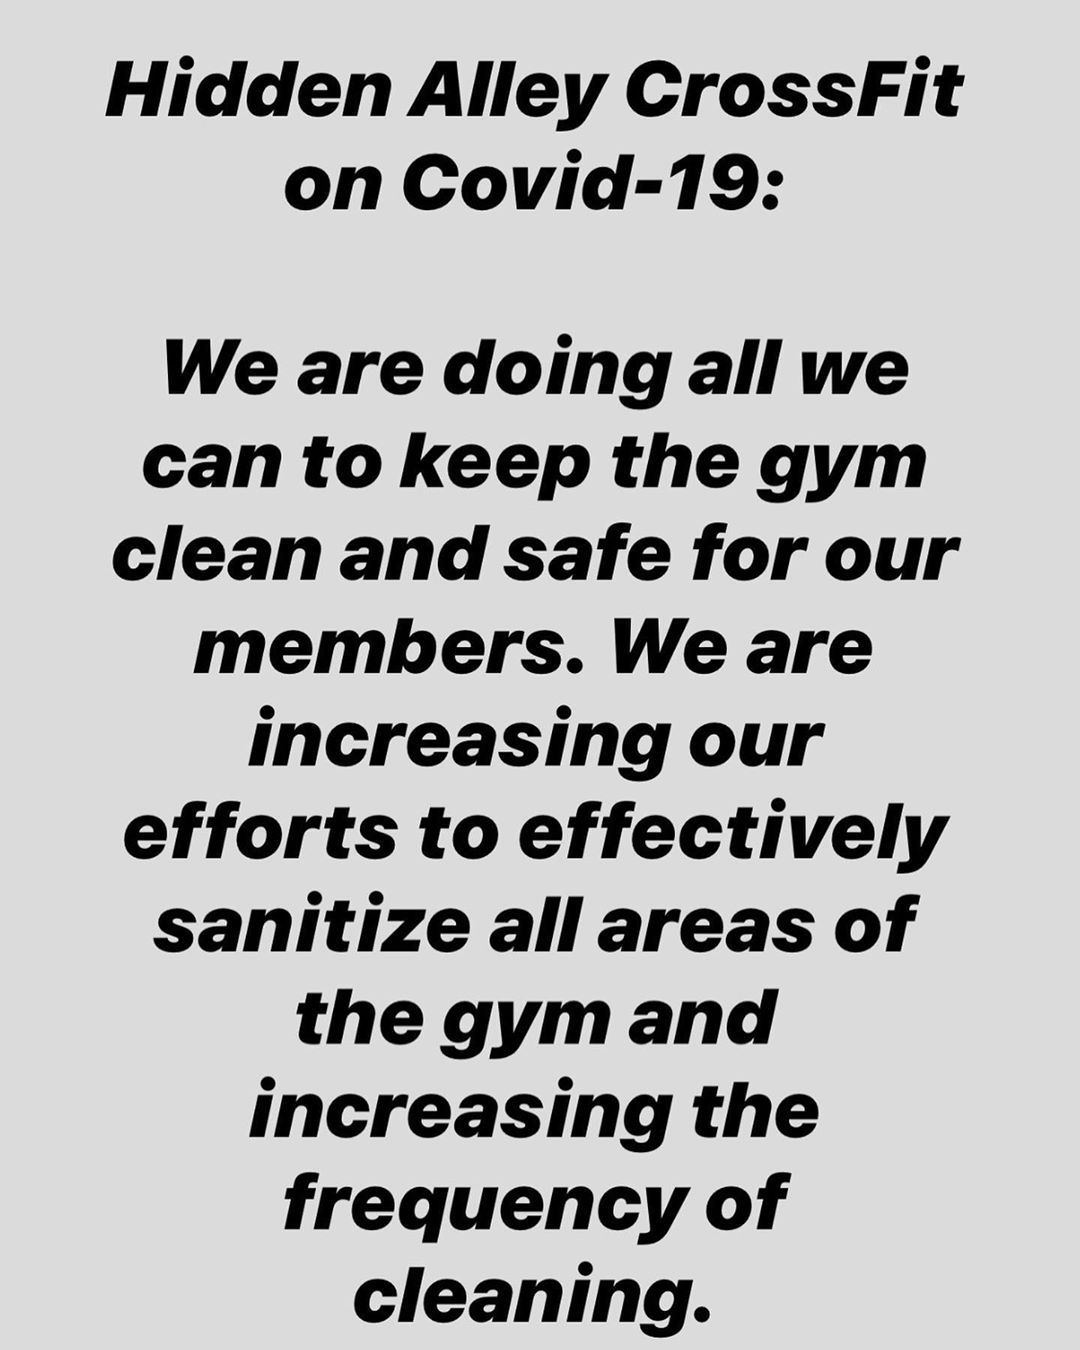 COVID-19. Wash hands. Drink water. Take vitamin c. Wipe down equipment before and after usage. Do all the things to keep yourself and all our members healthy. We will continue to update you on a regular basis on our status!